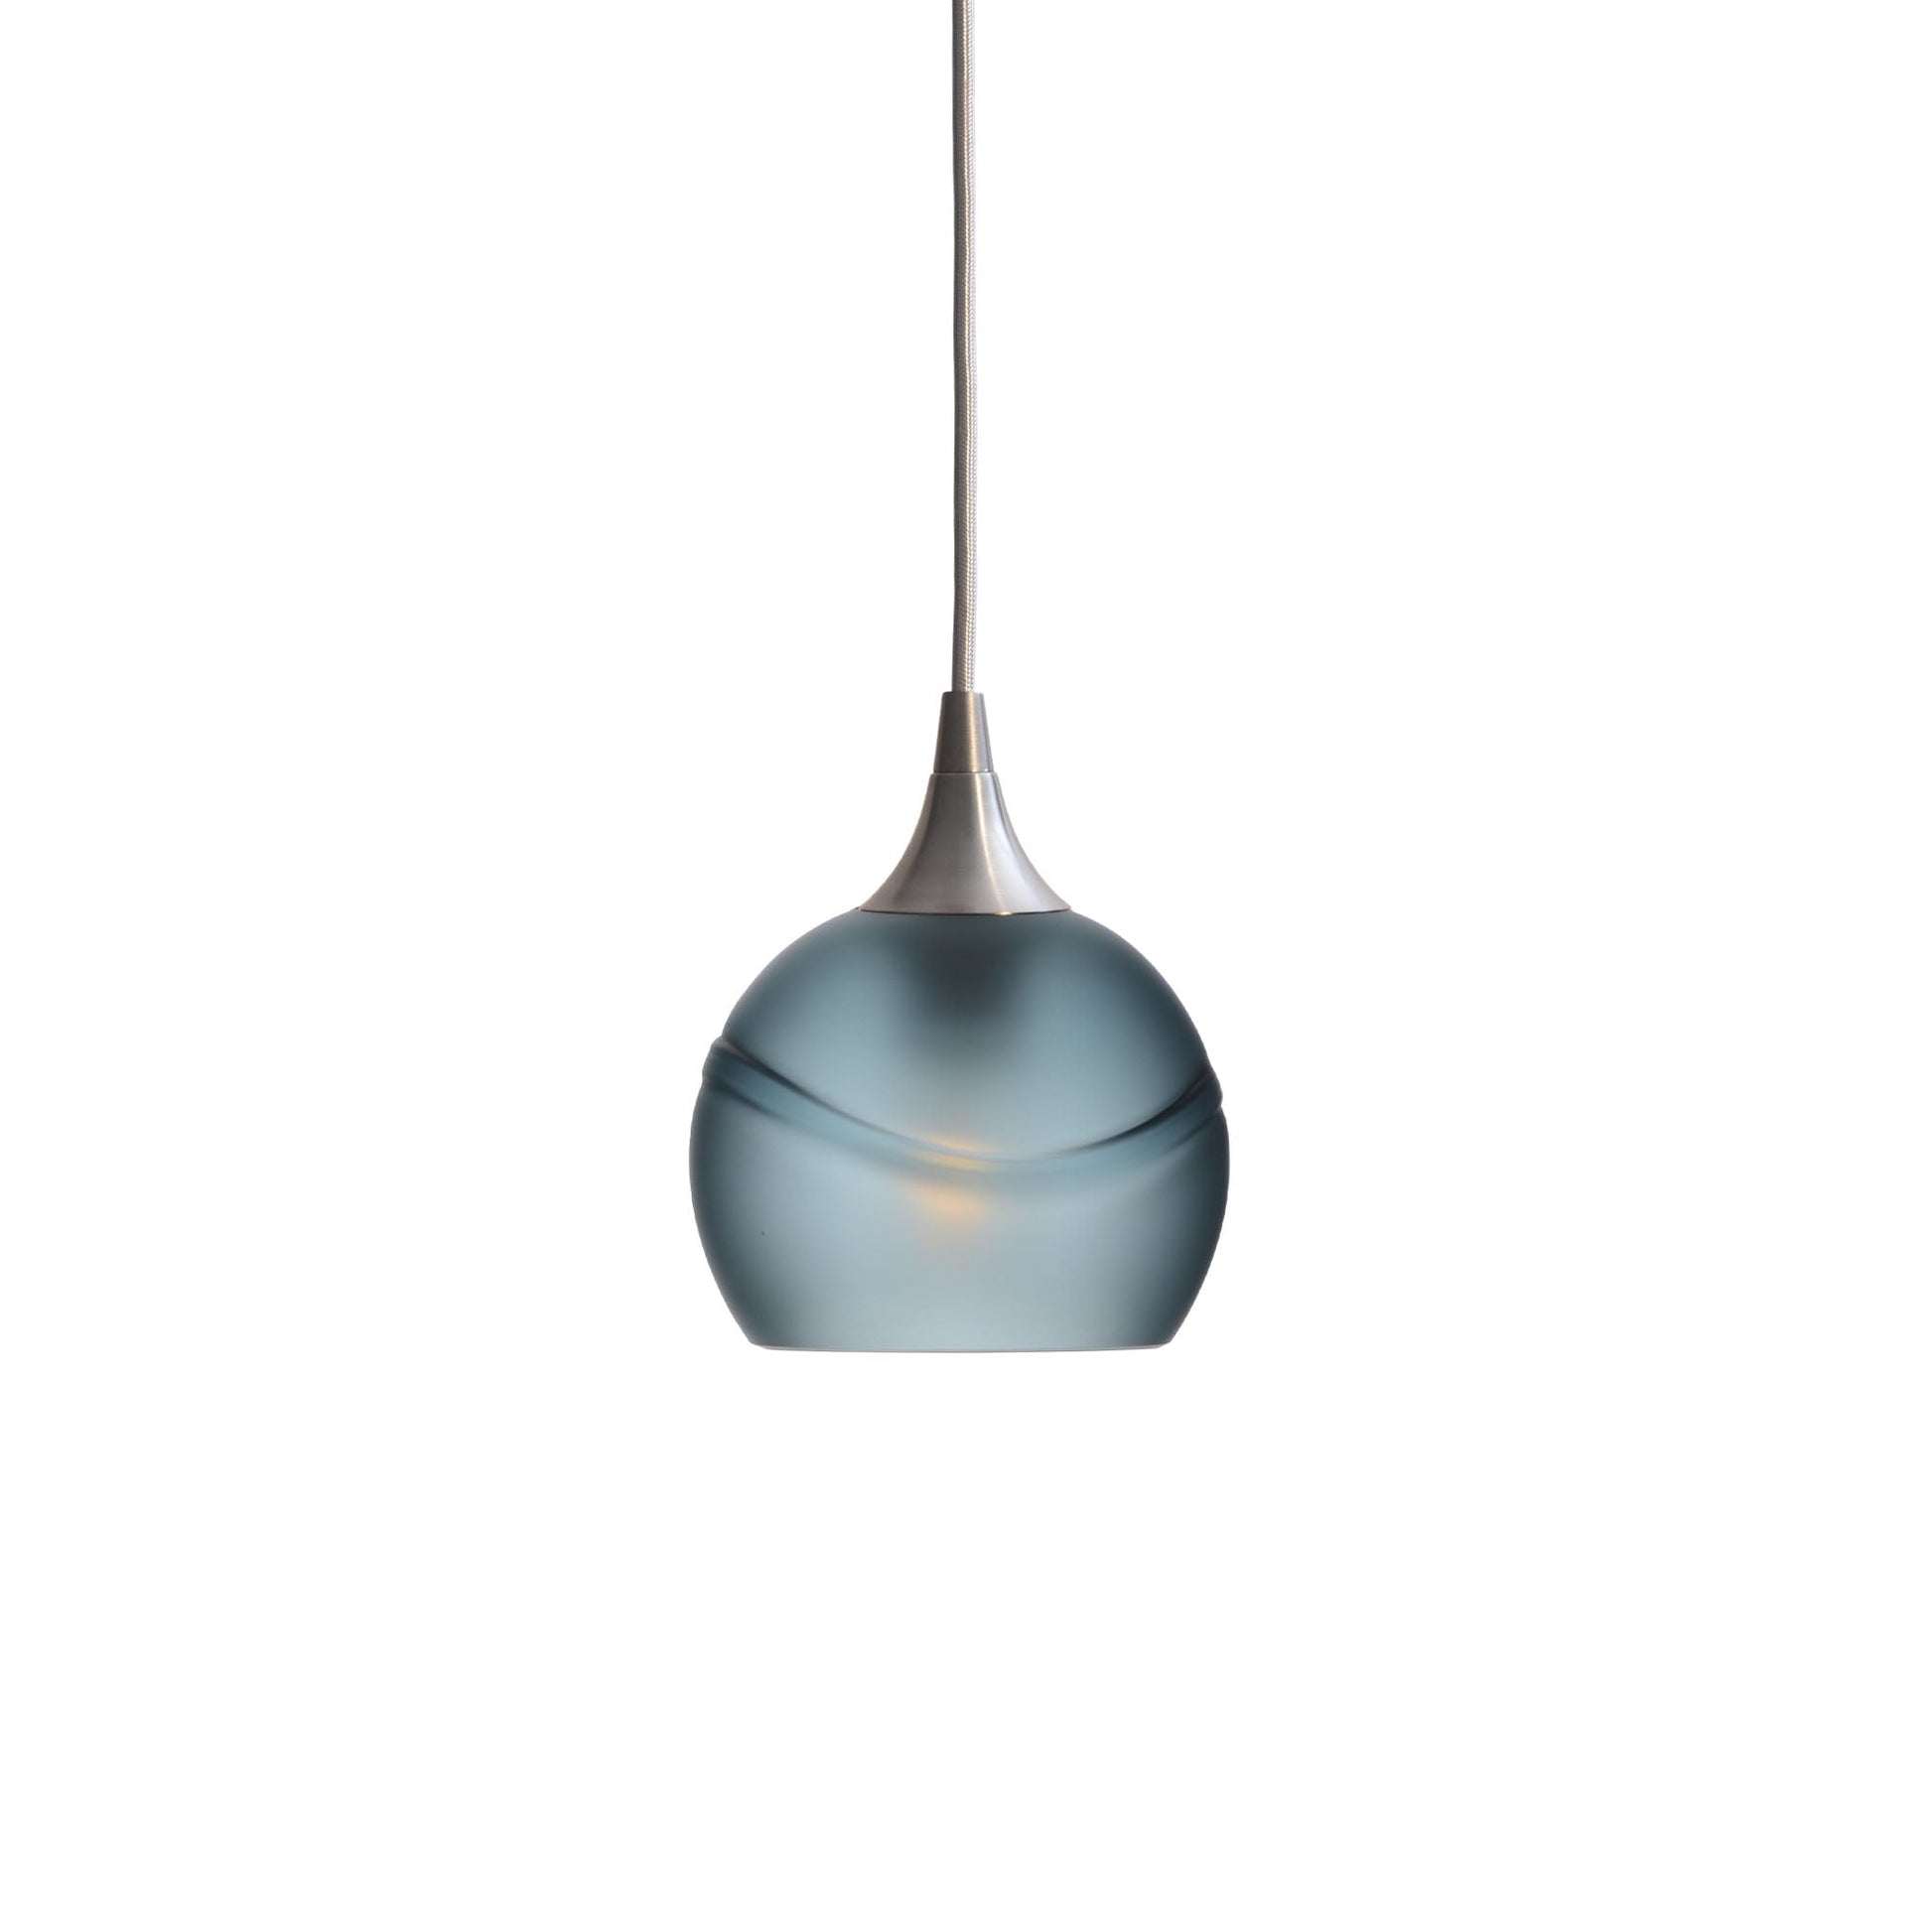 763 Glacial: Single Pendant Light-Glass-Bicycle Glass Co - Hotshop-Slate Gray-Brushed Nickel-Bicycle Glass Co